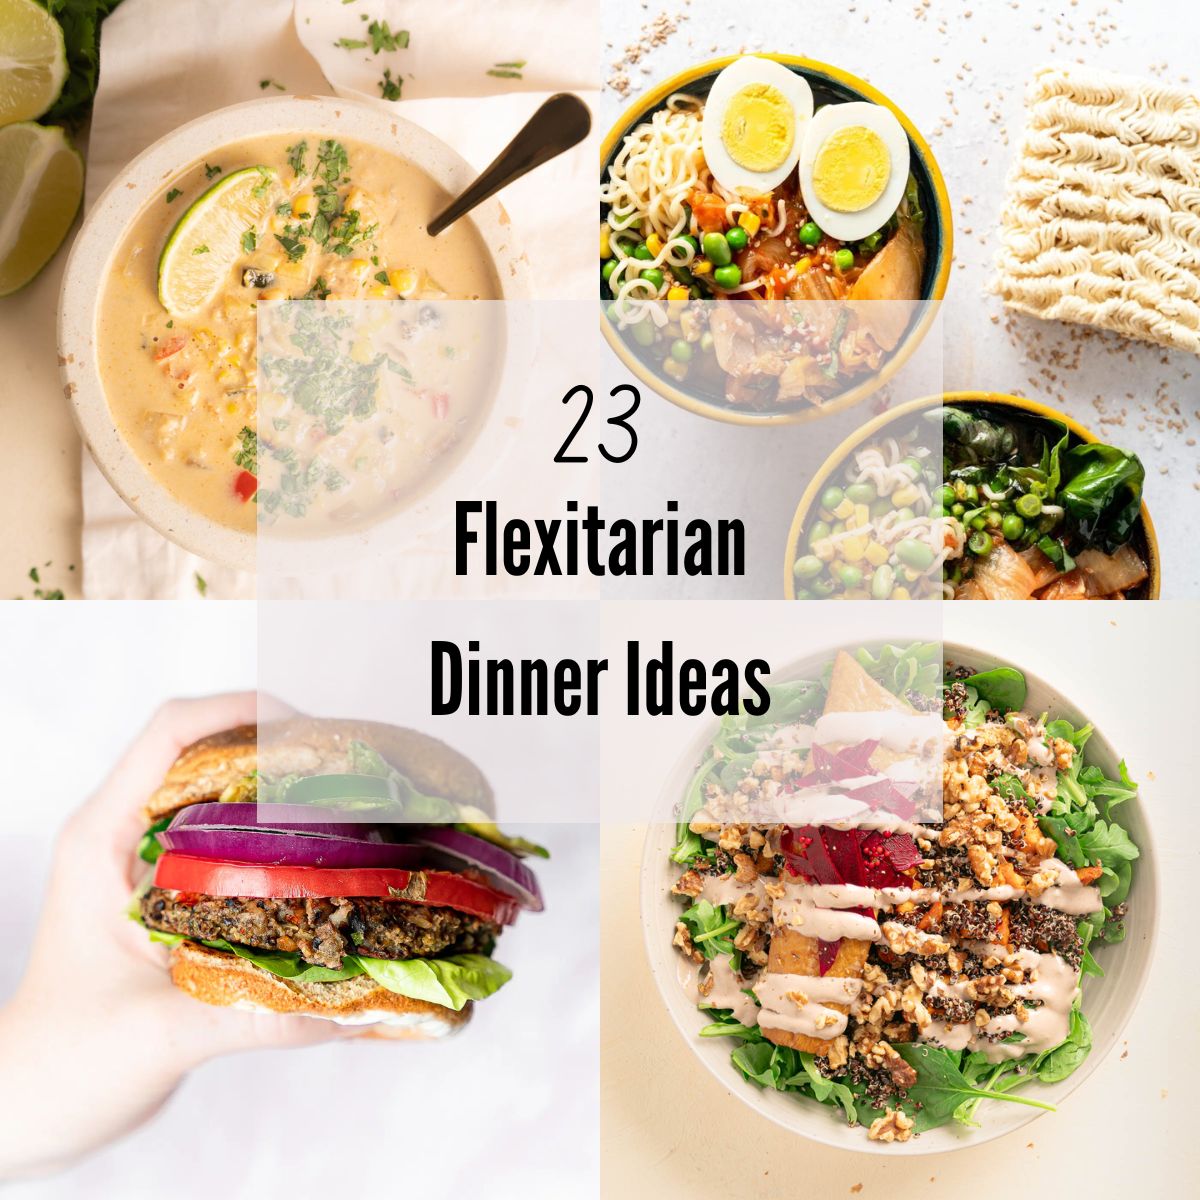 Featured Image for 23 Flexitarian Dinner Ideas with 4 pictures of a soup, noodle bowl, a veggie burger, and a smoked fish salad